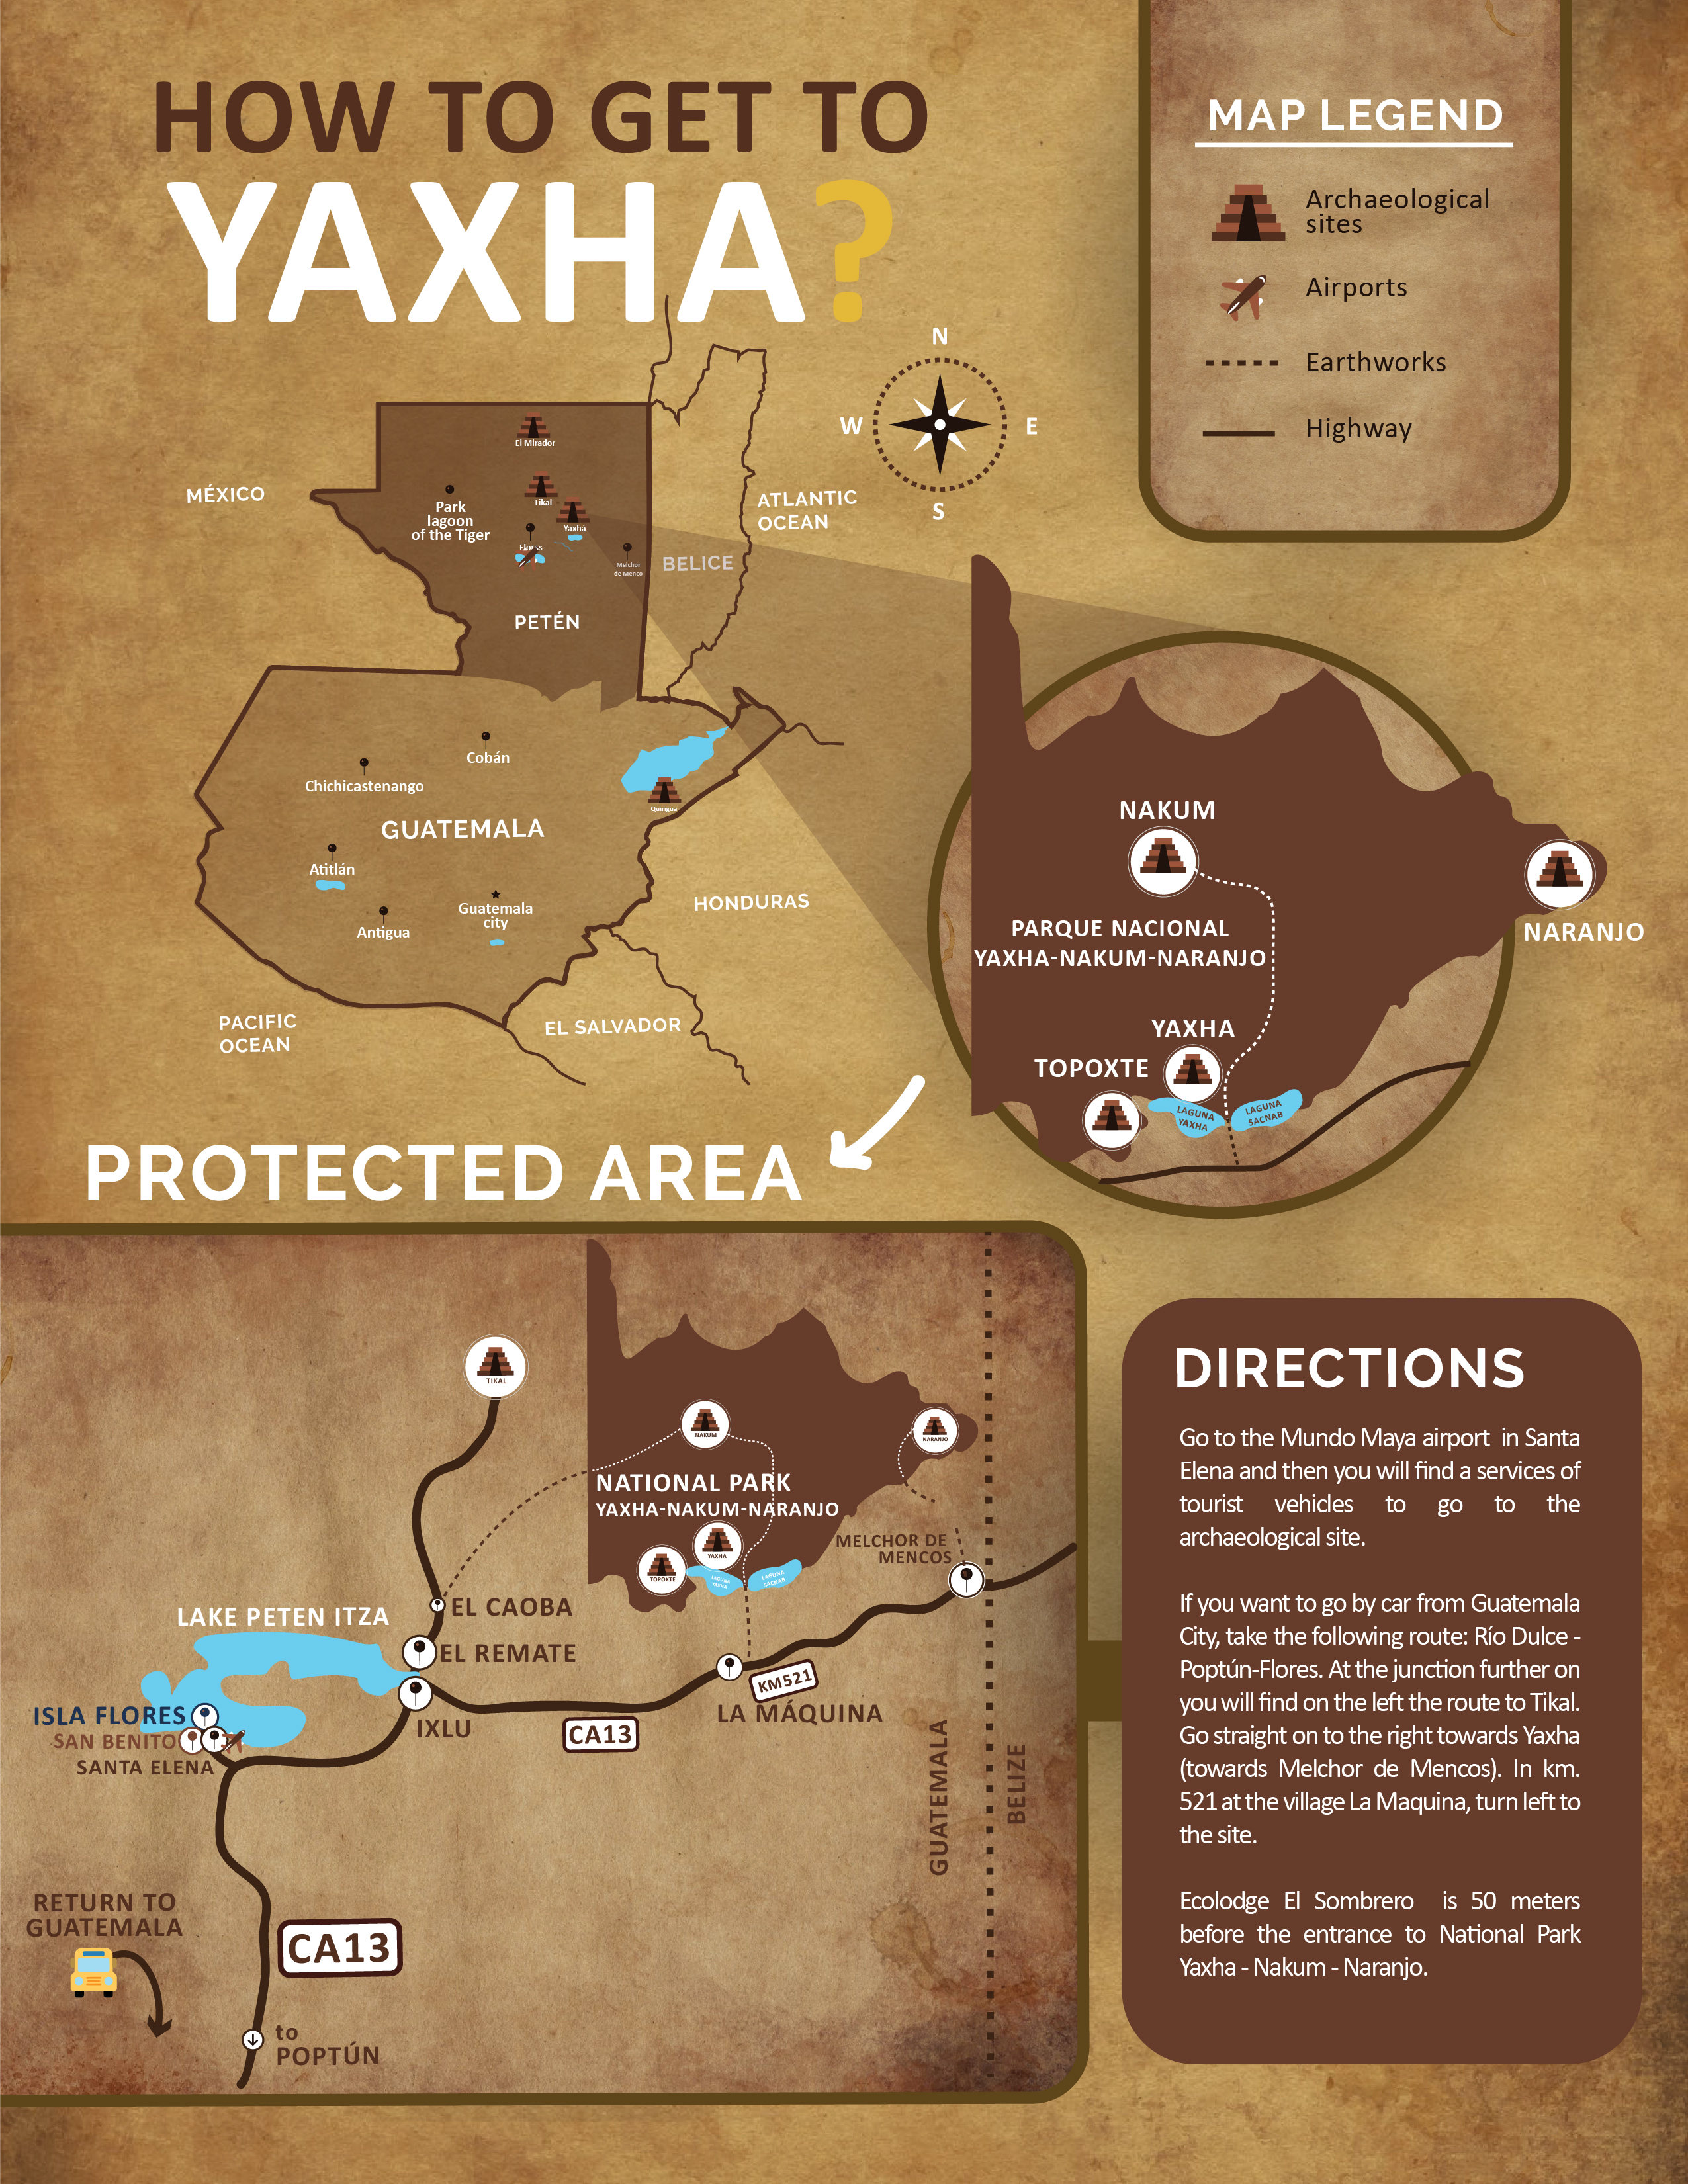 How to get to Yaxha